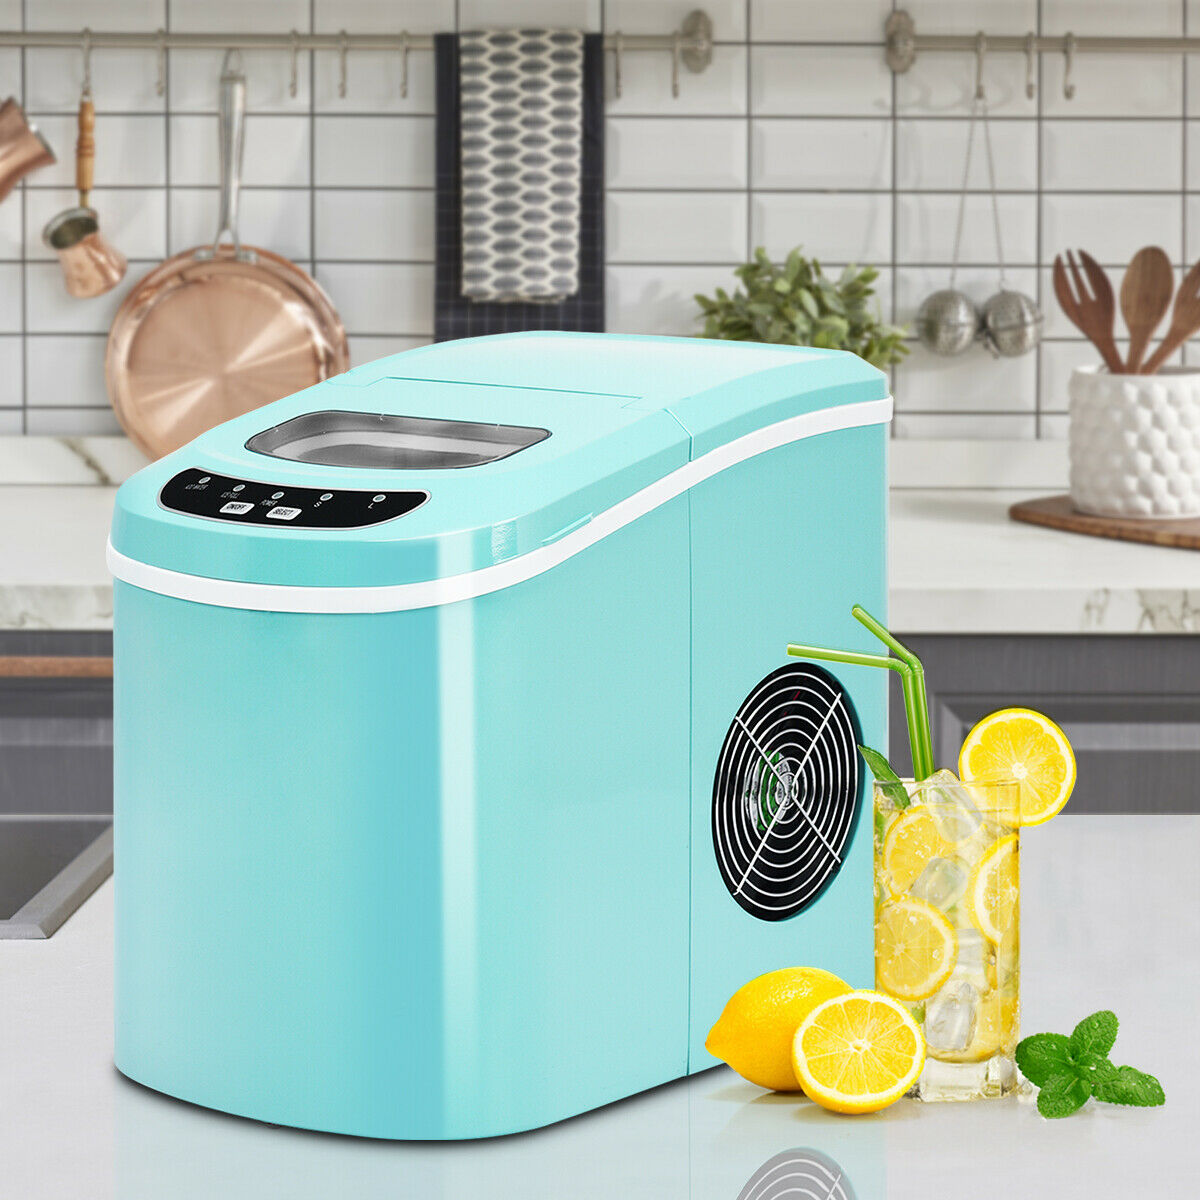 Stakol Portable Compact Electric Ice Maker Machine Mini Cube 26lb/Day Mint Green - image 4 of 10